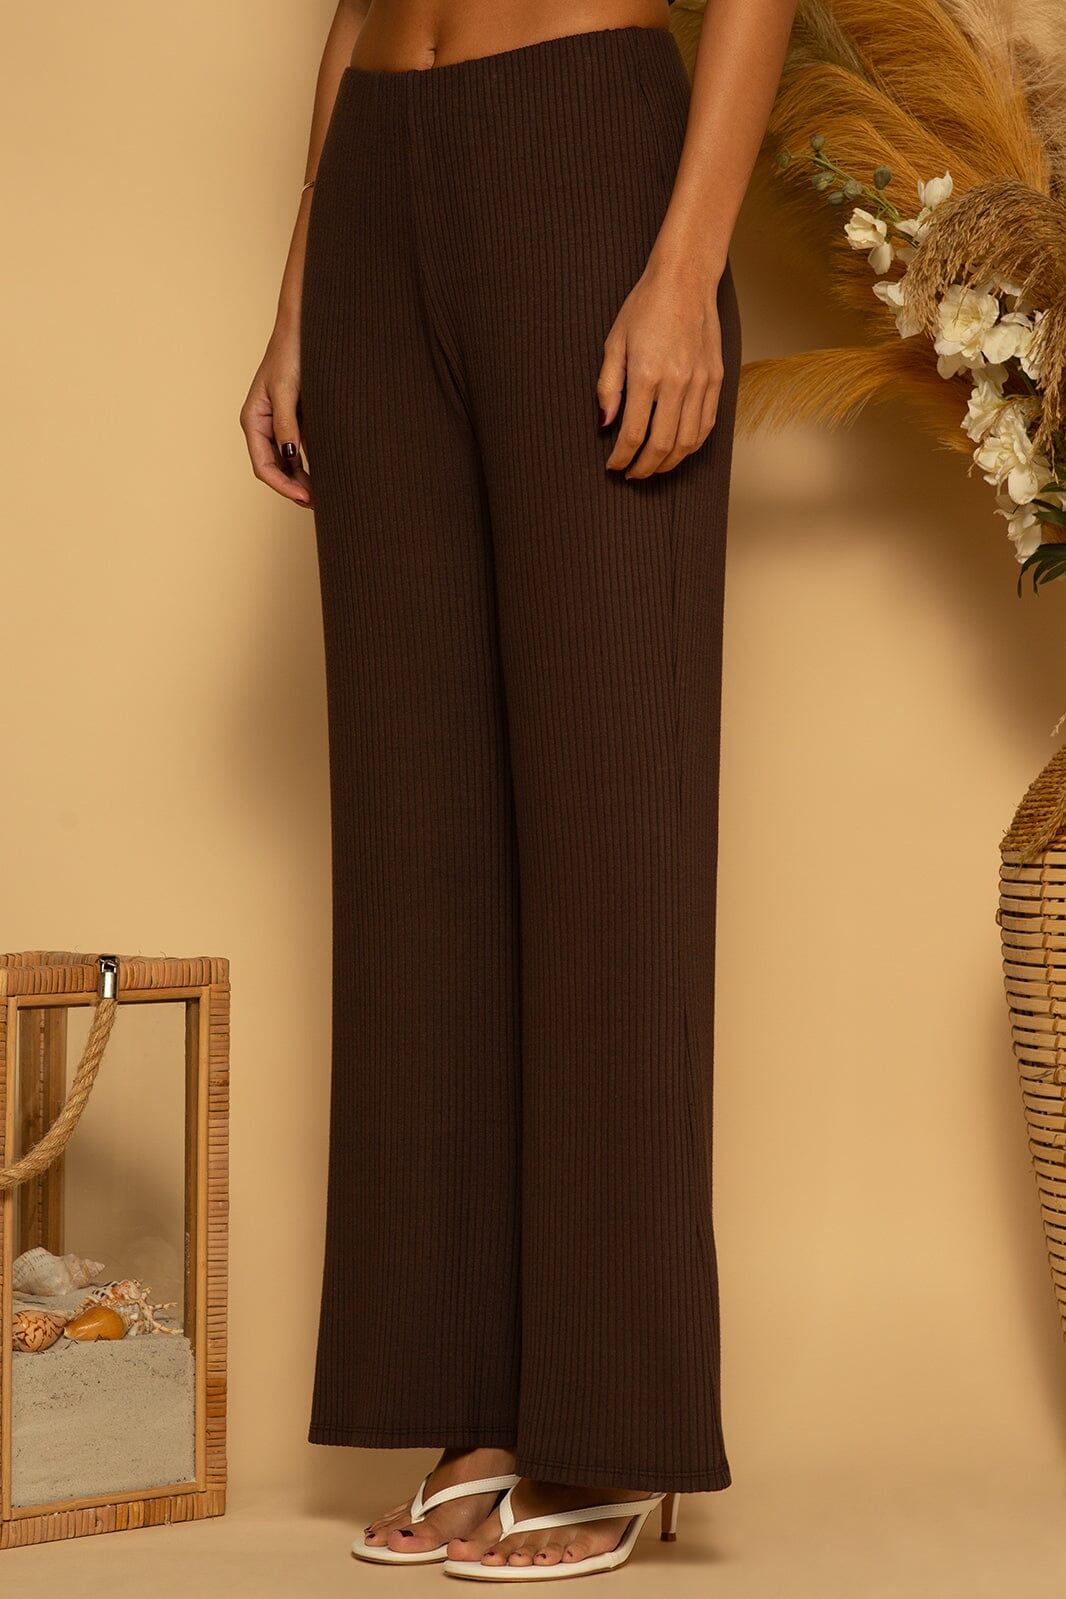 RIBBED PULL ON PANT - ESPRESSO - XS